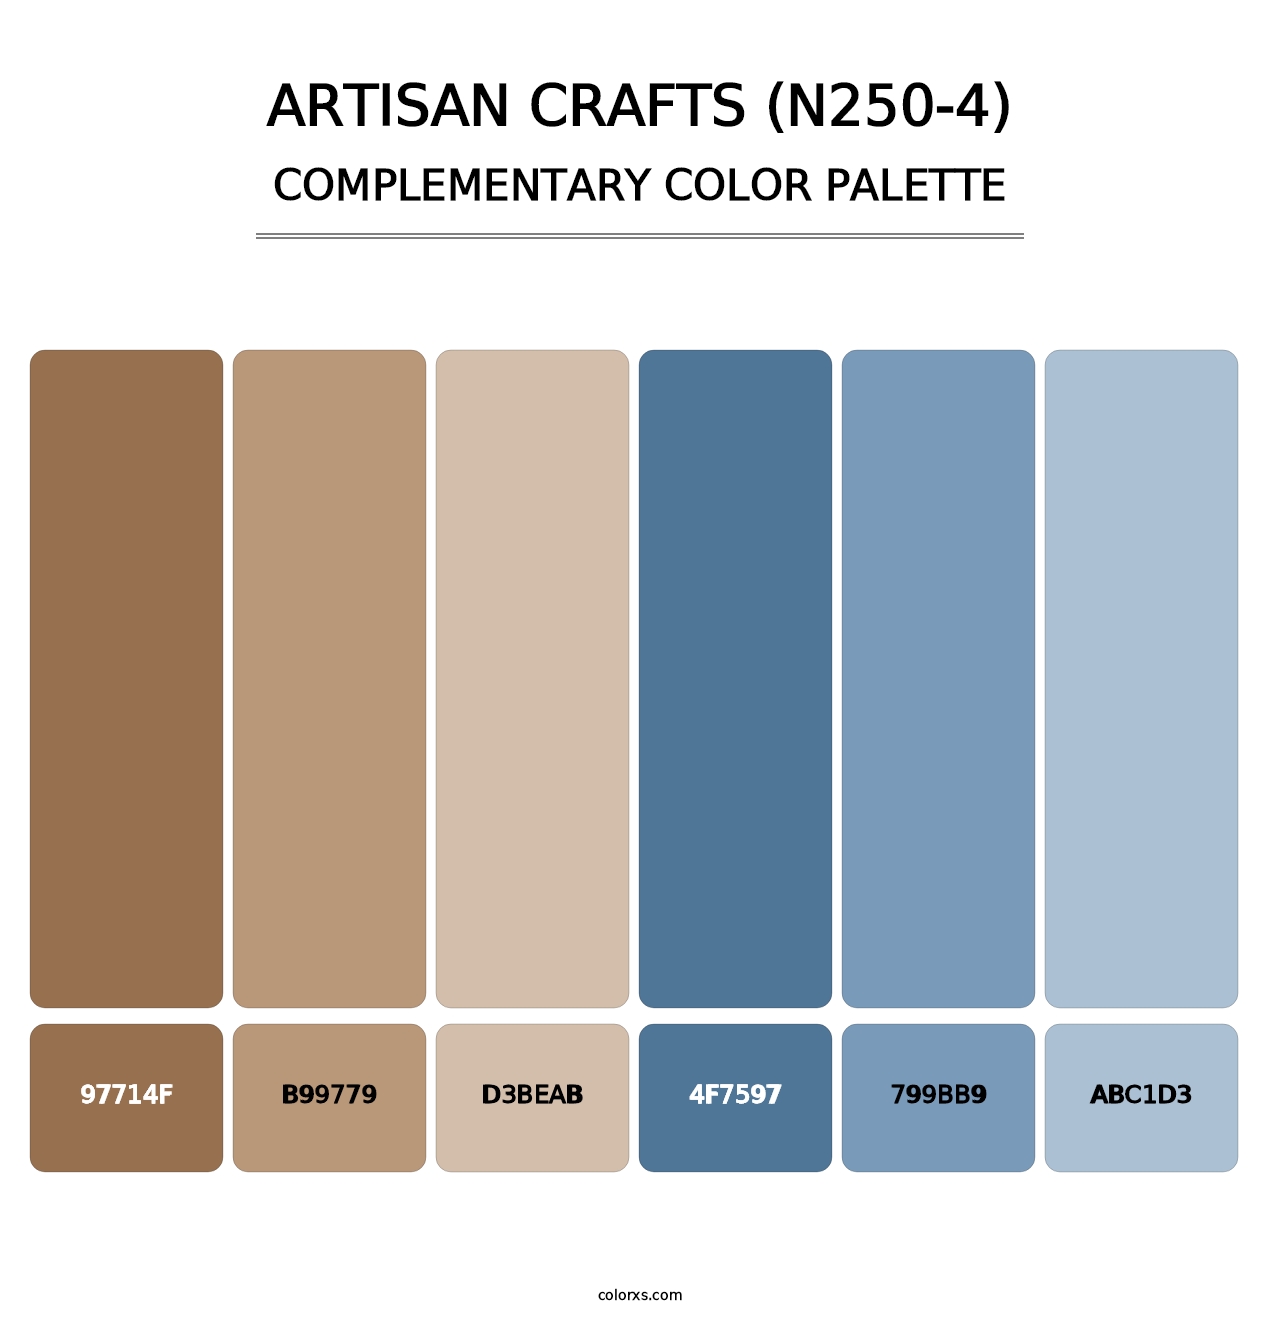 Artisan Crafts (N250-4) - Complementary Color Palette